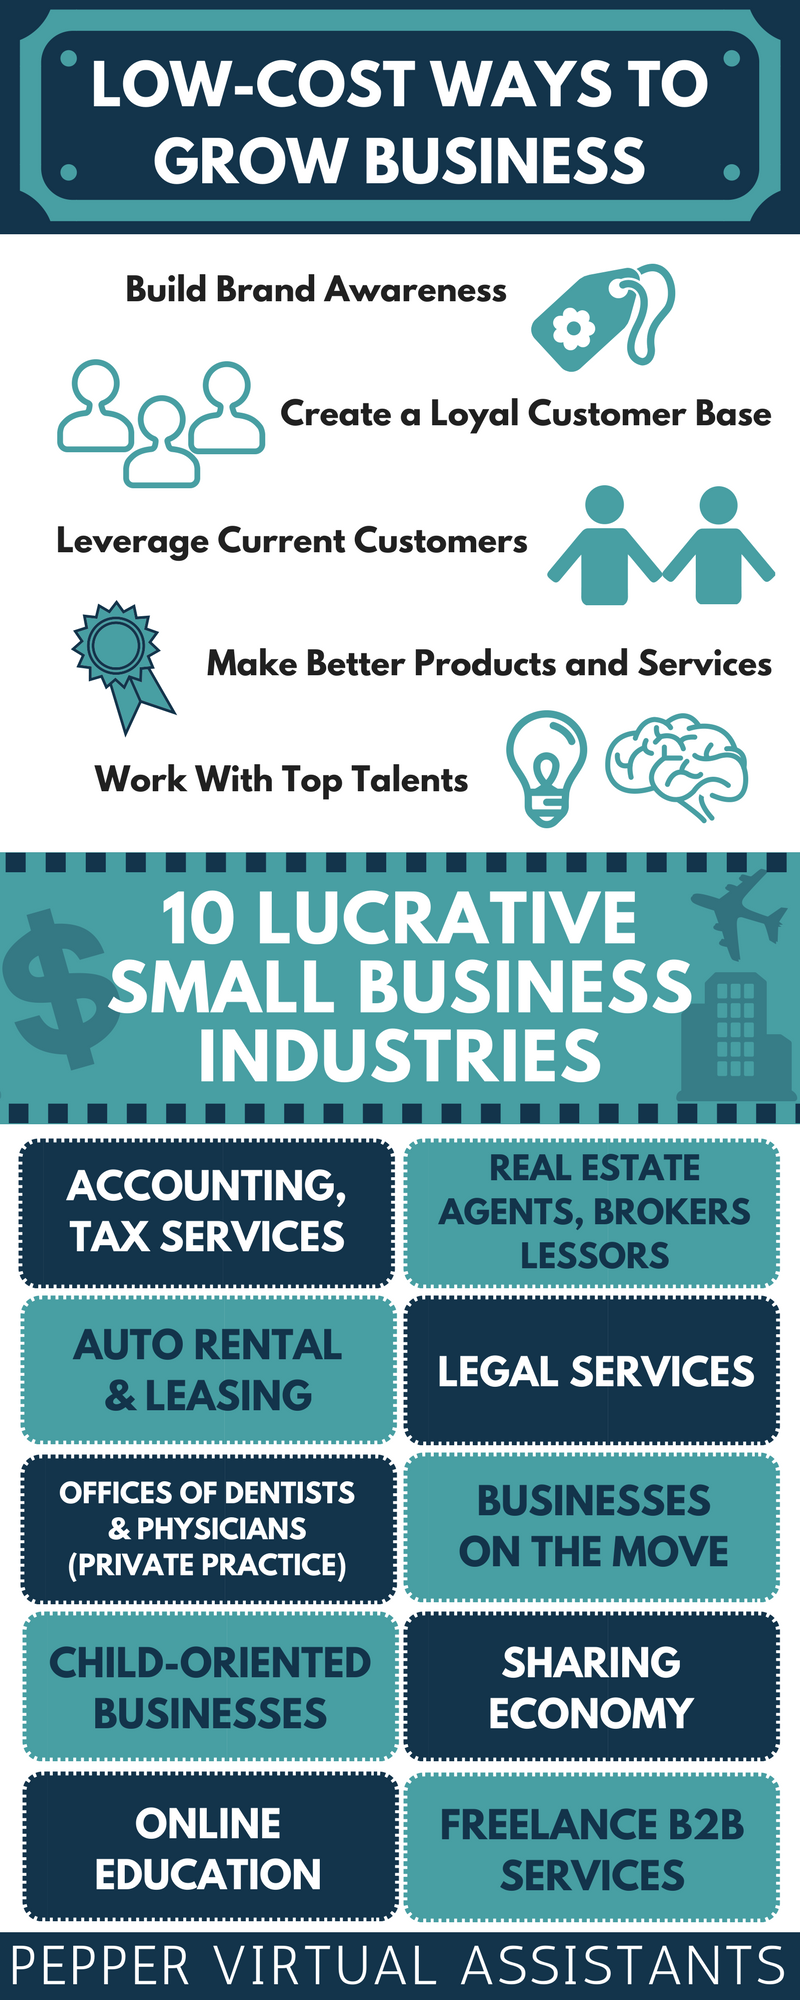 Infographic LowCost Ways To Grow Business / 10 Lucrative Small